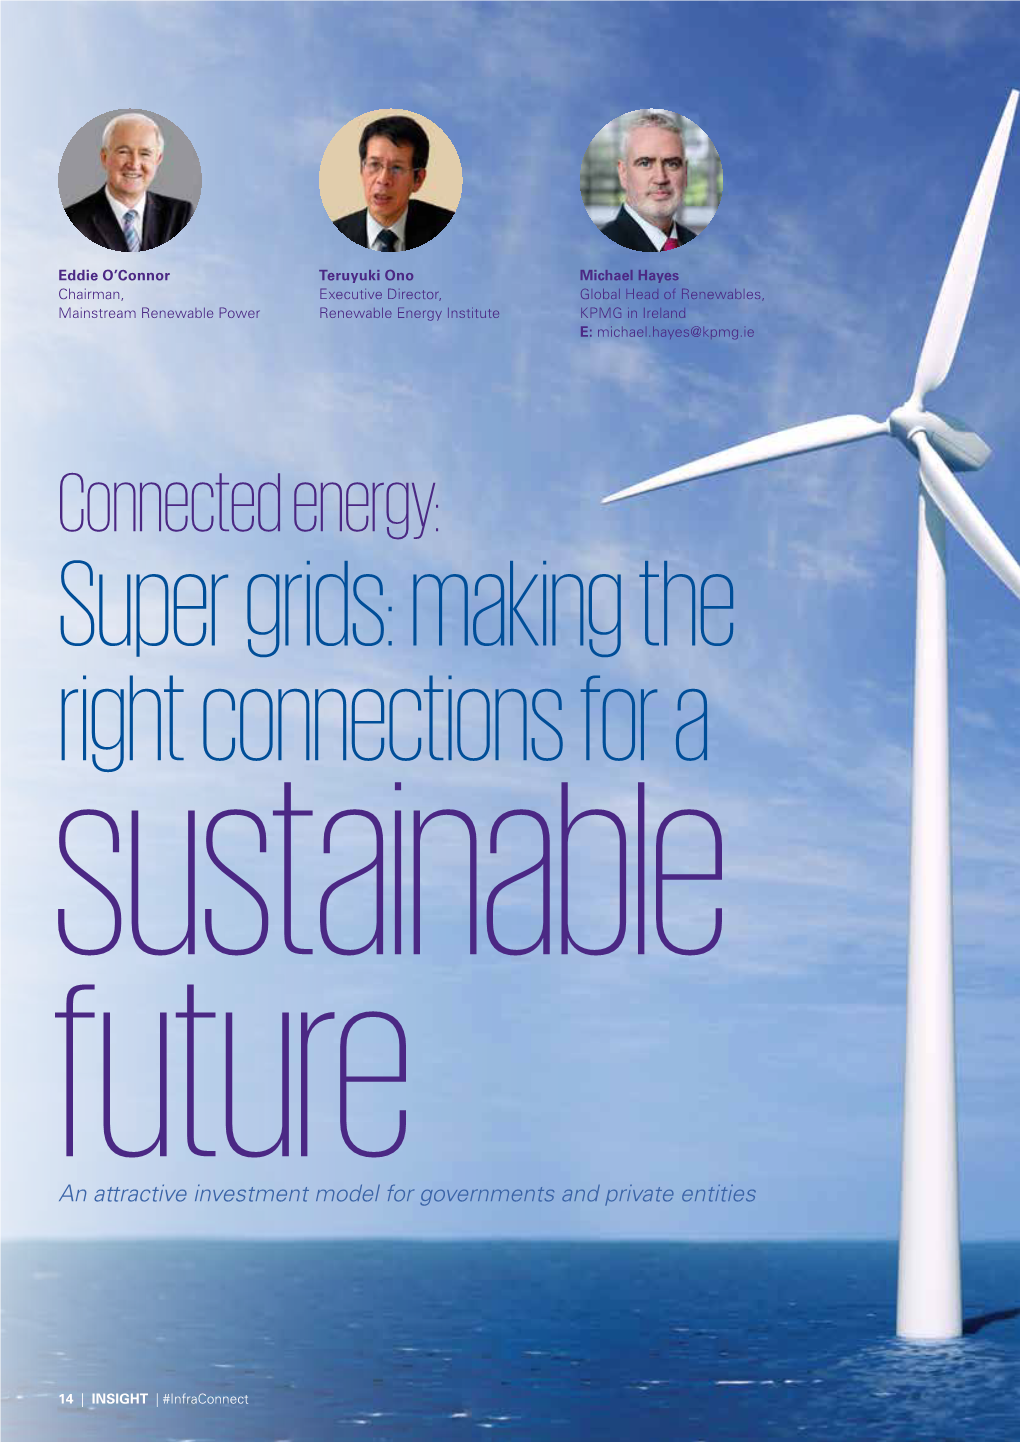 Super Grids: Making the Right Connections for a Sustainable Future an Attractive Investment Model for Governments and Private Entities